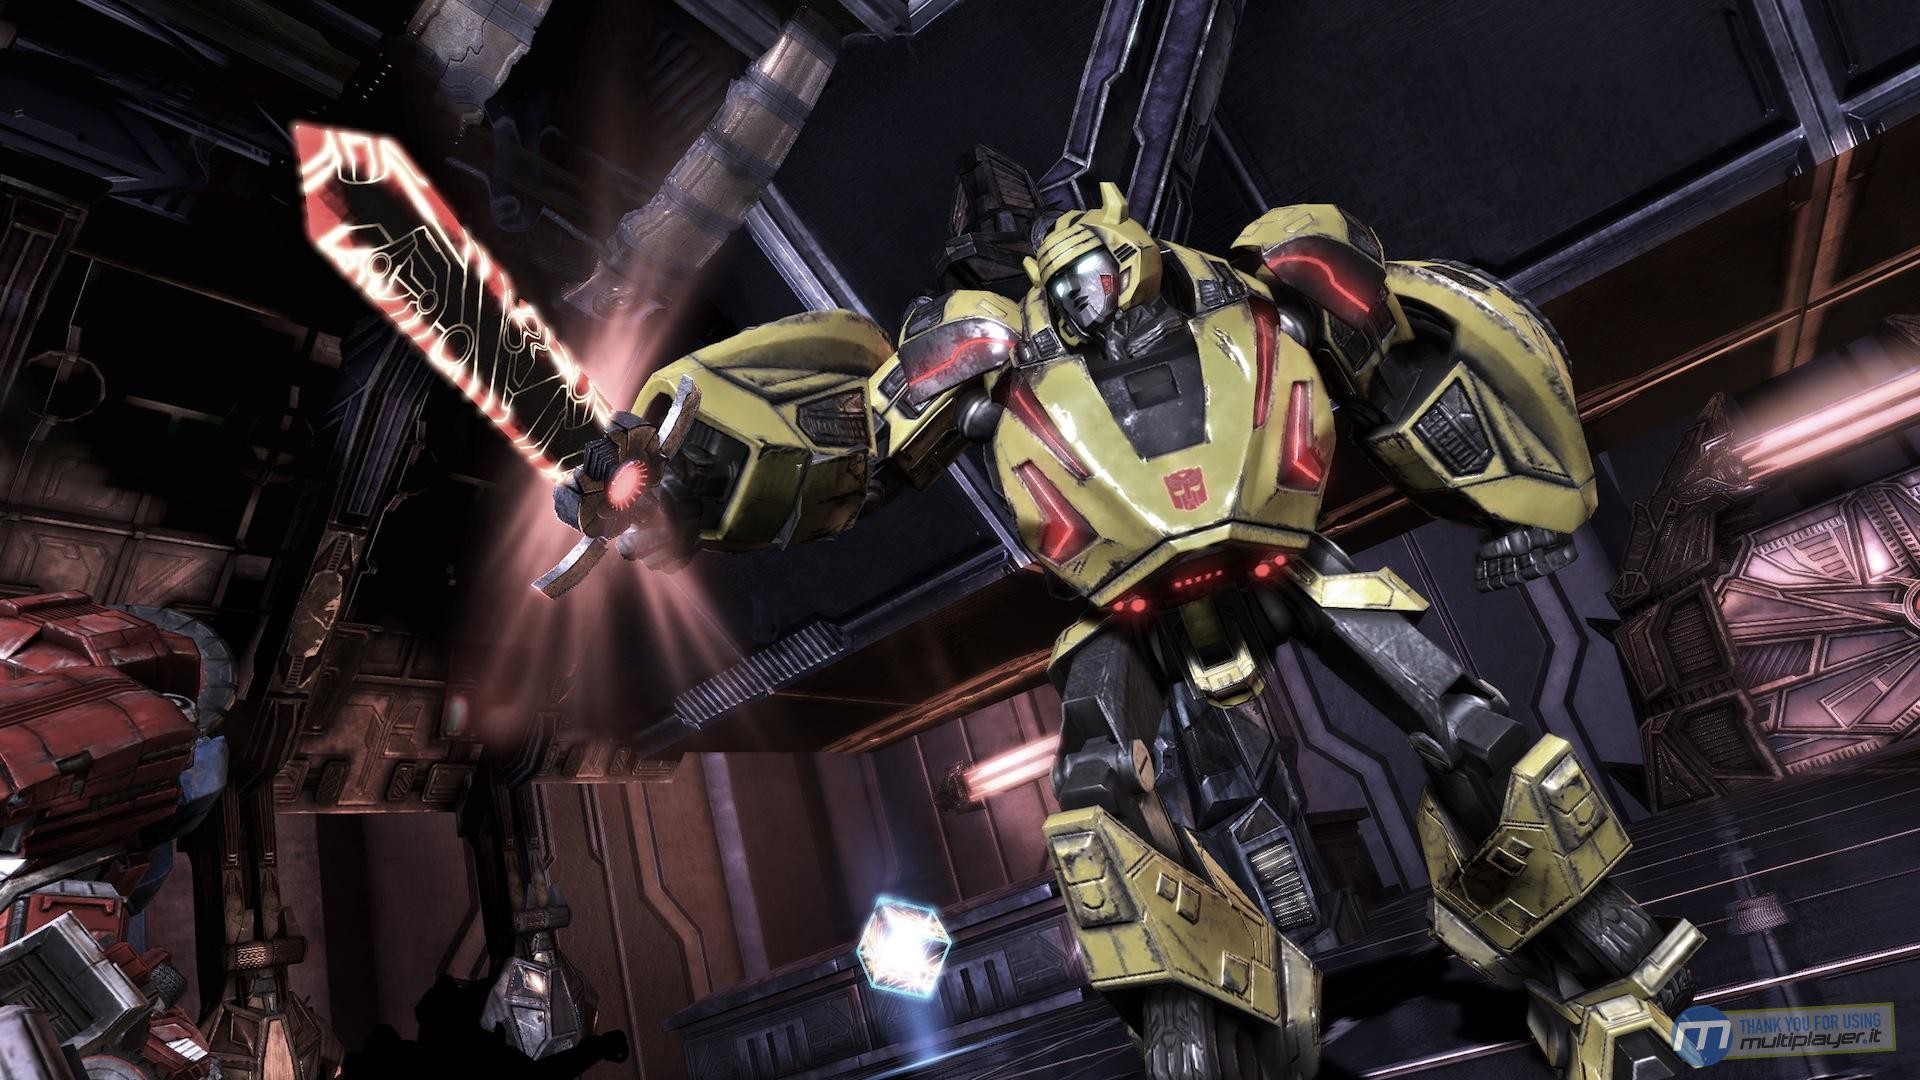 1920x1080 100 Word Review - Transformers: War for Cybertron (PC)